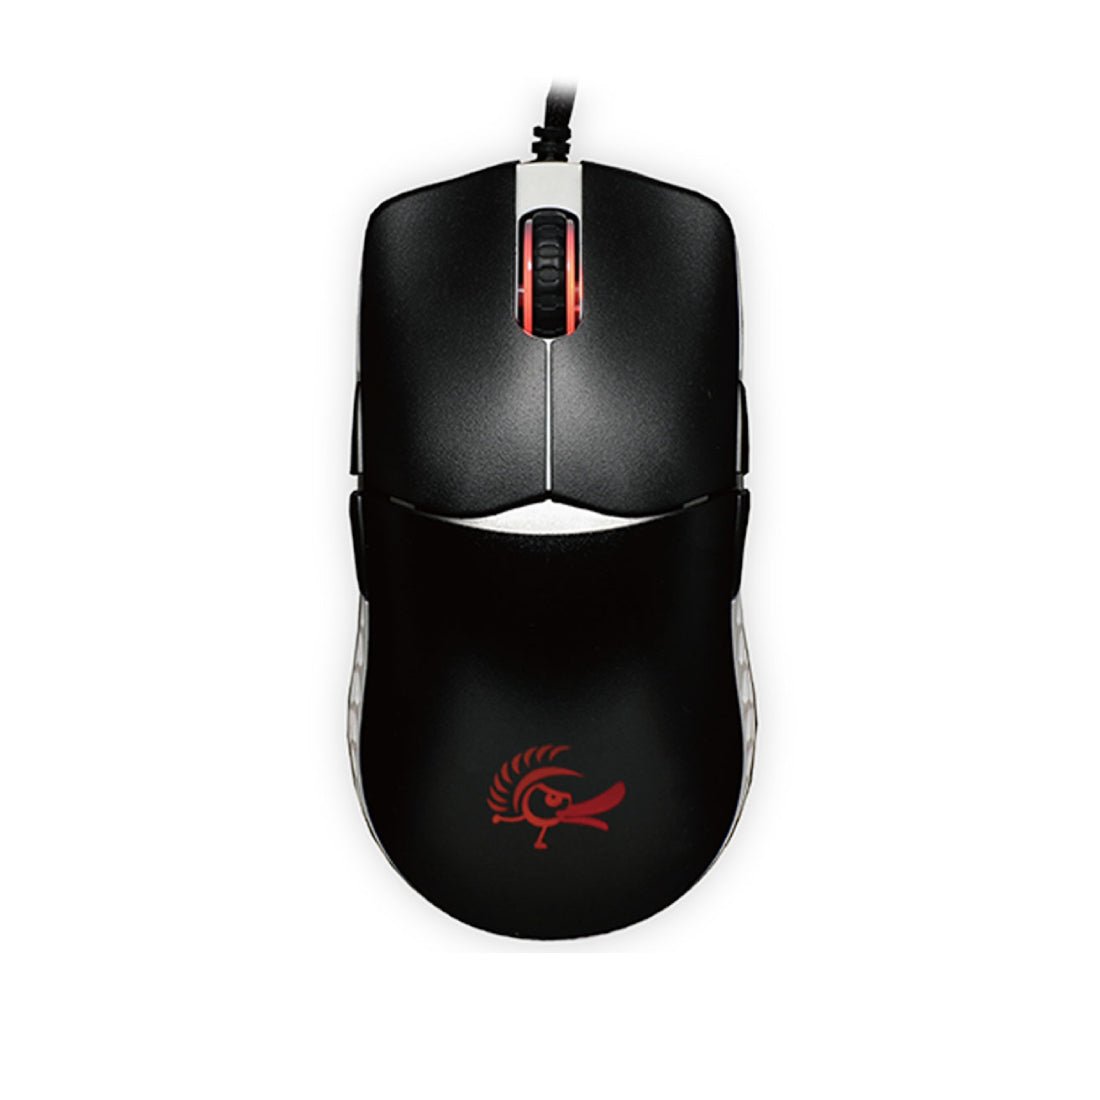 Ducky Feather Black & White Wired Gaming Mouse - Huano - فأرة - Store 974 | ستور ٩٧٤